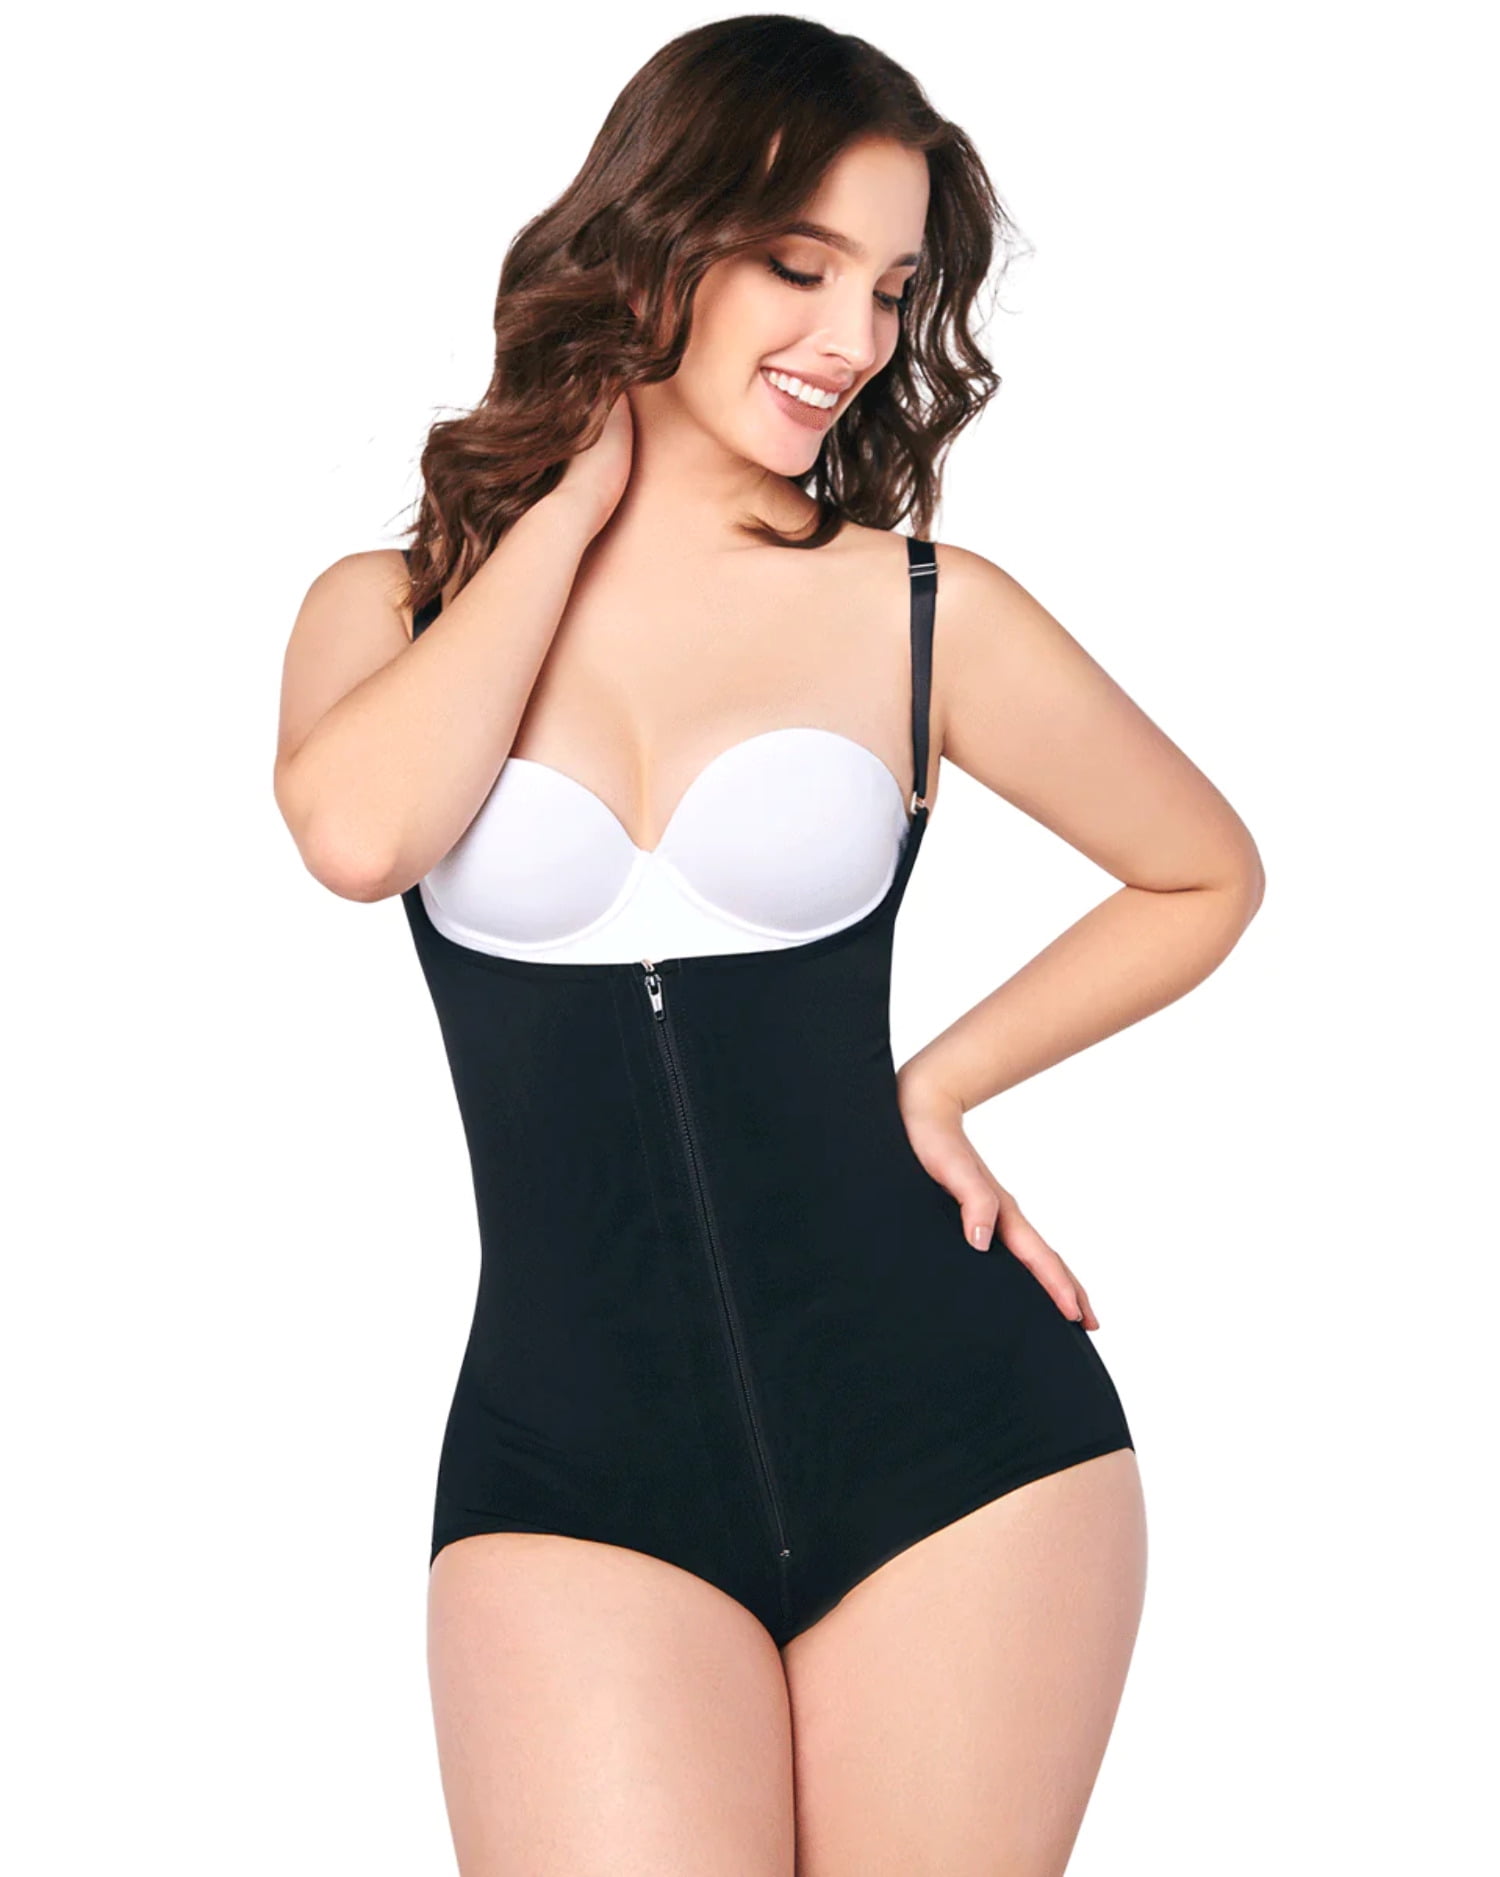 ShapewearUSA on X: Highlight your curves! Jackie London Shapewear goes  with everything 👗 Available at  🔖 Save 10% off  with promo SHAPE10⠀⠀⠀⠀⠀⠀⠀⠀⠀⠀⠀ FREE shipping on all orders.⠀ #jackielondon # shapewear